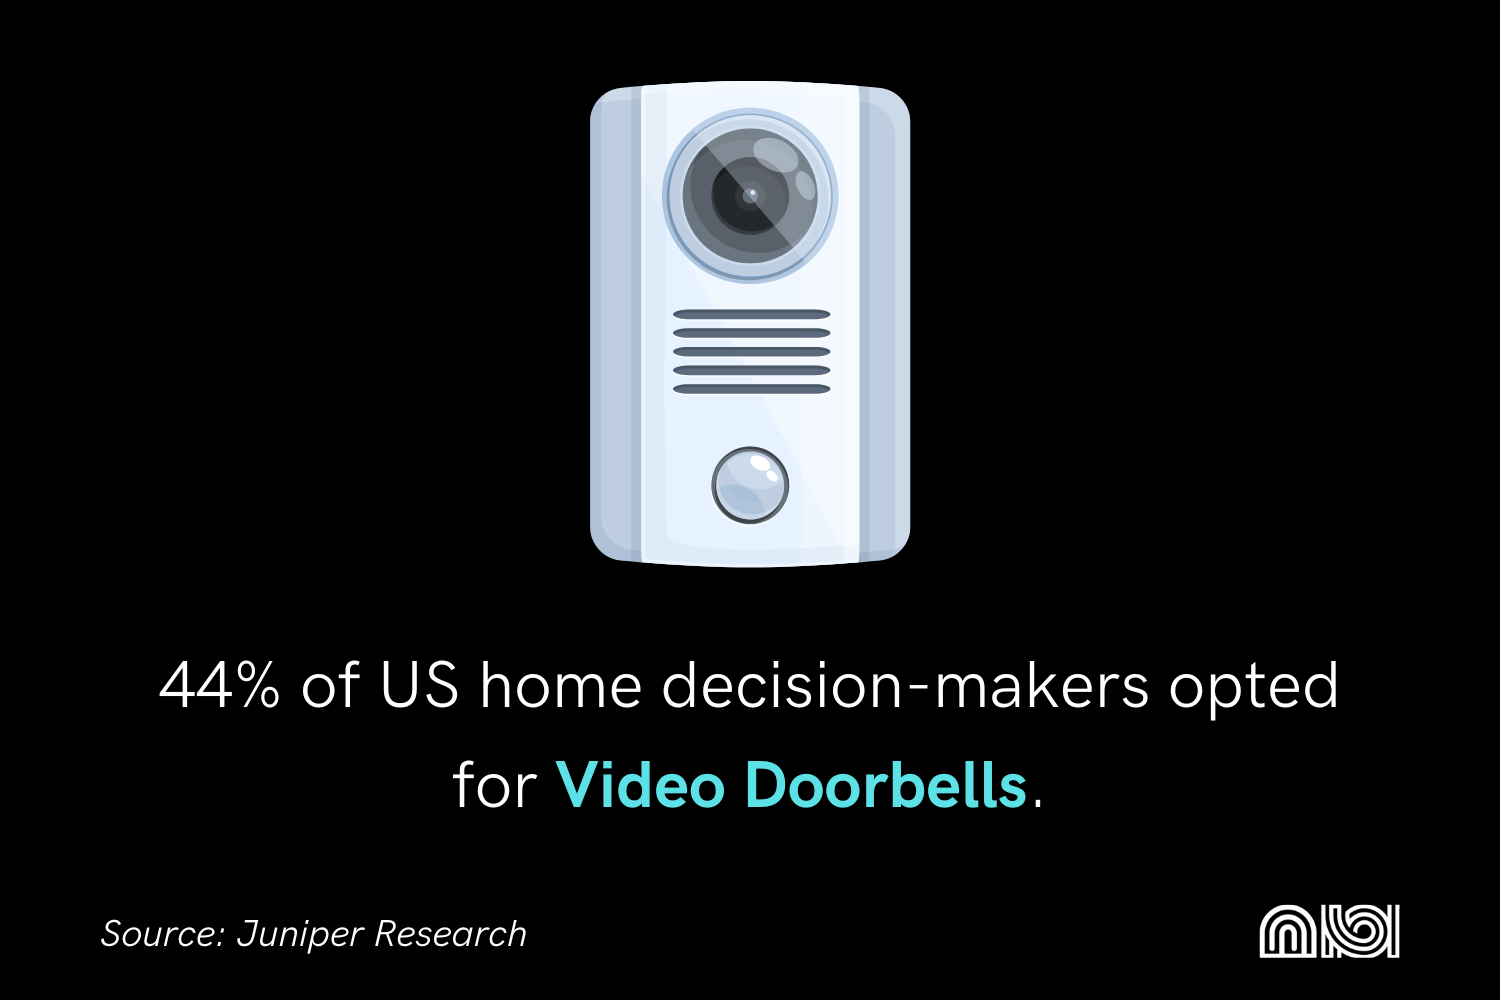 Statistic: 44% of US home decision-makers choose Video Doorbells for enhanced security.